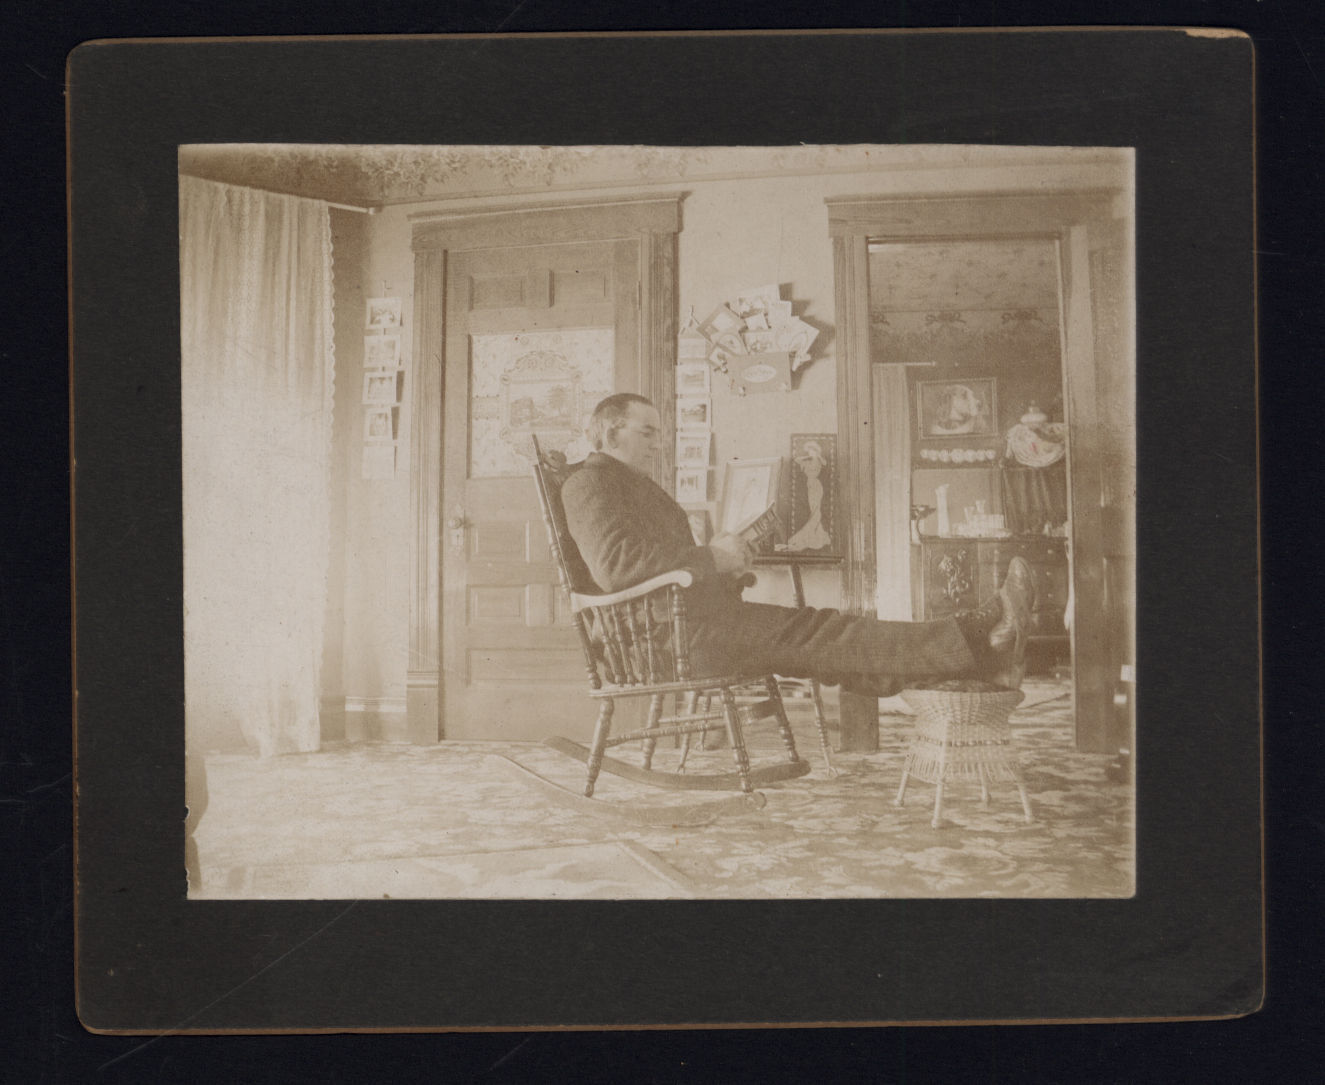 from ALBUM * CABINET CARD photo - MAN in ROCKING CHAIR using Footstool HOME